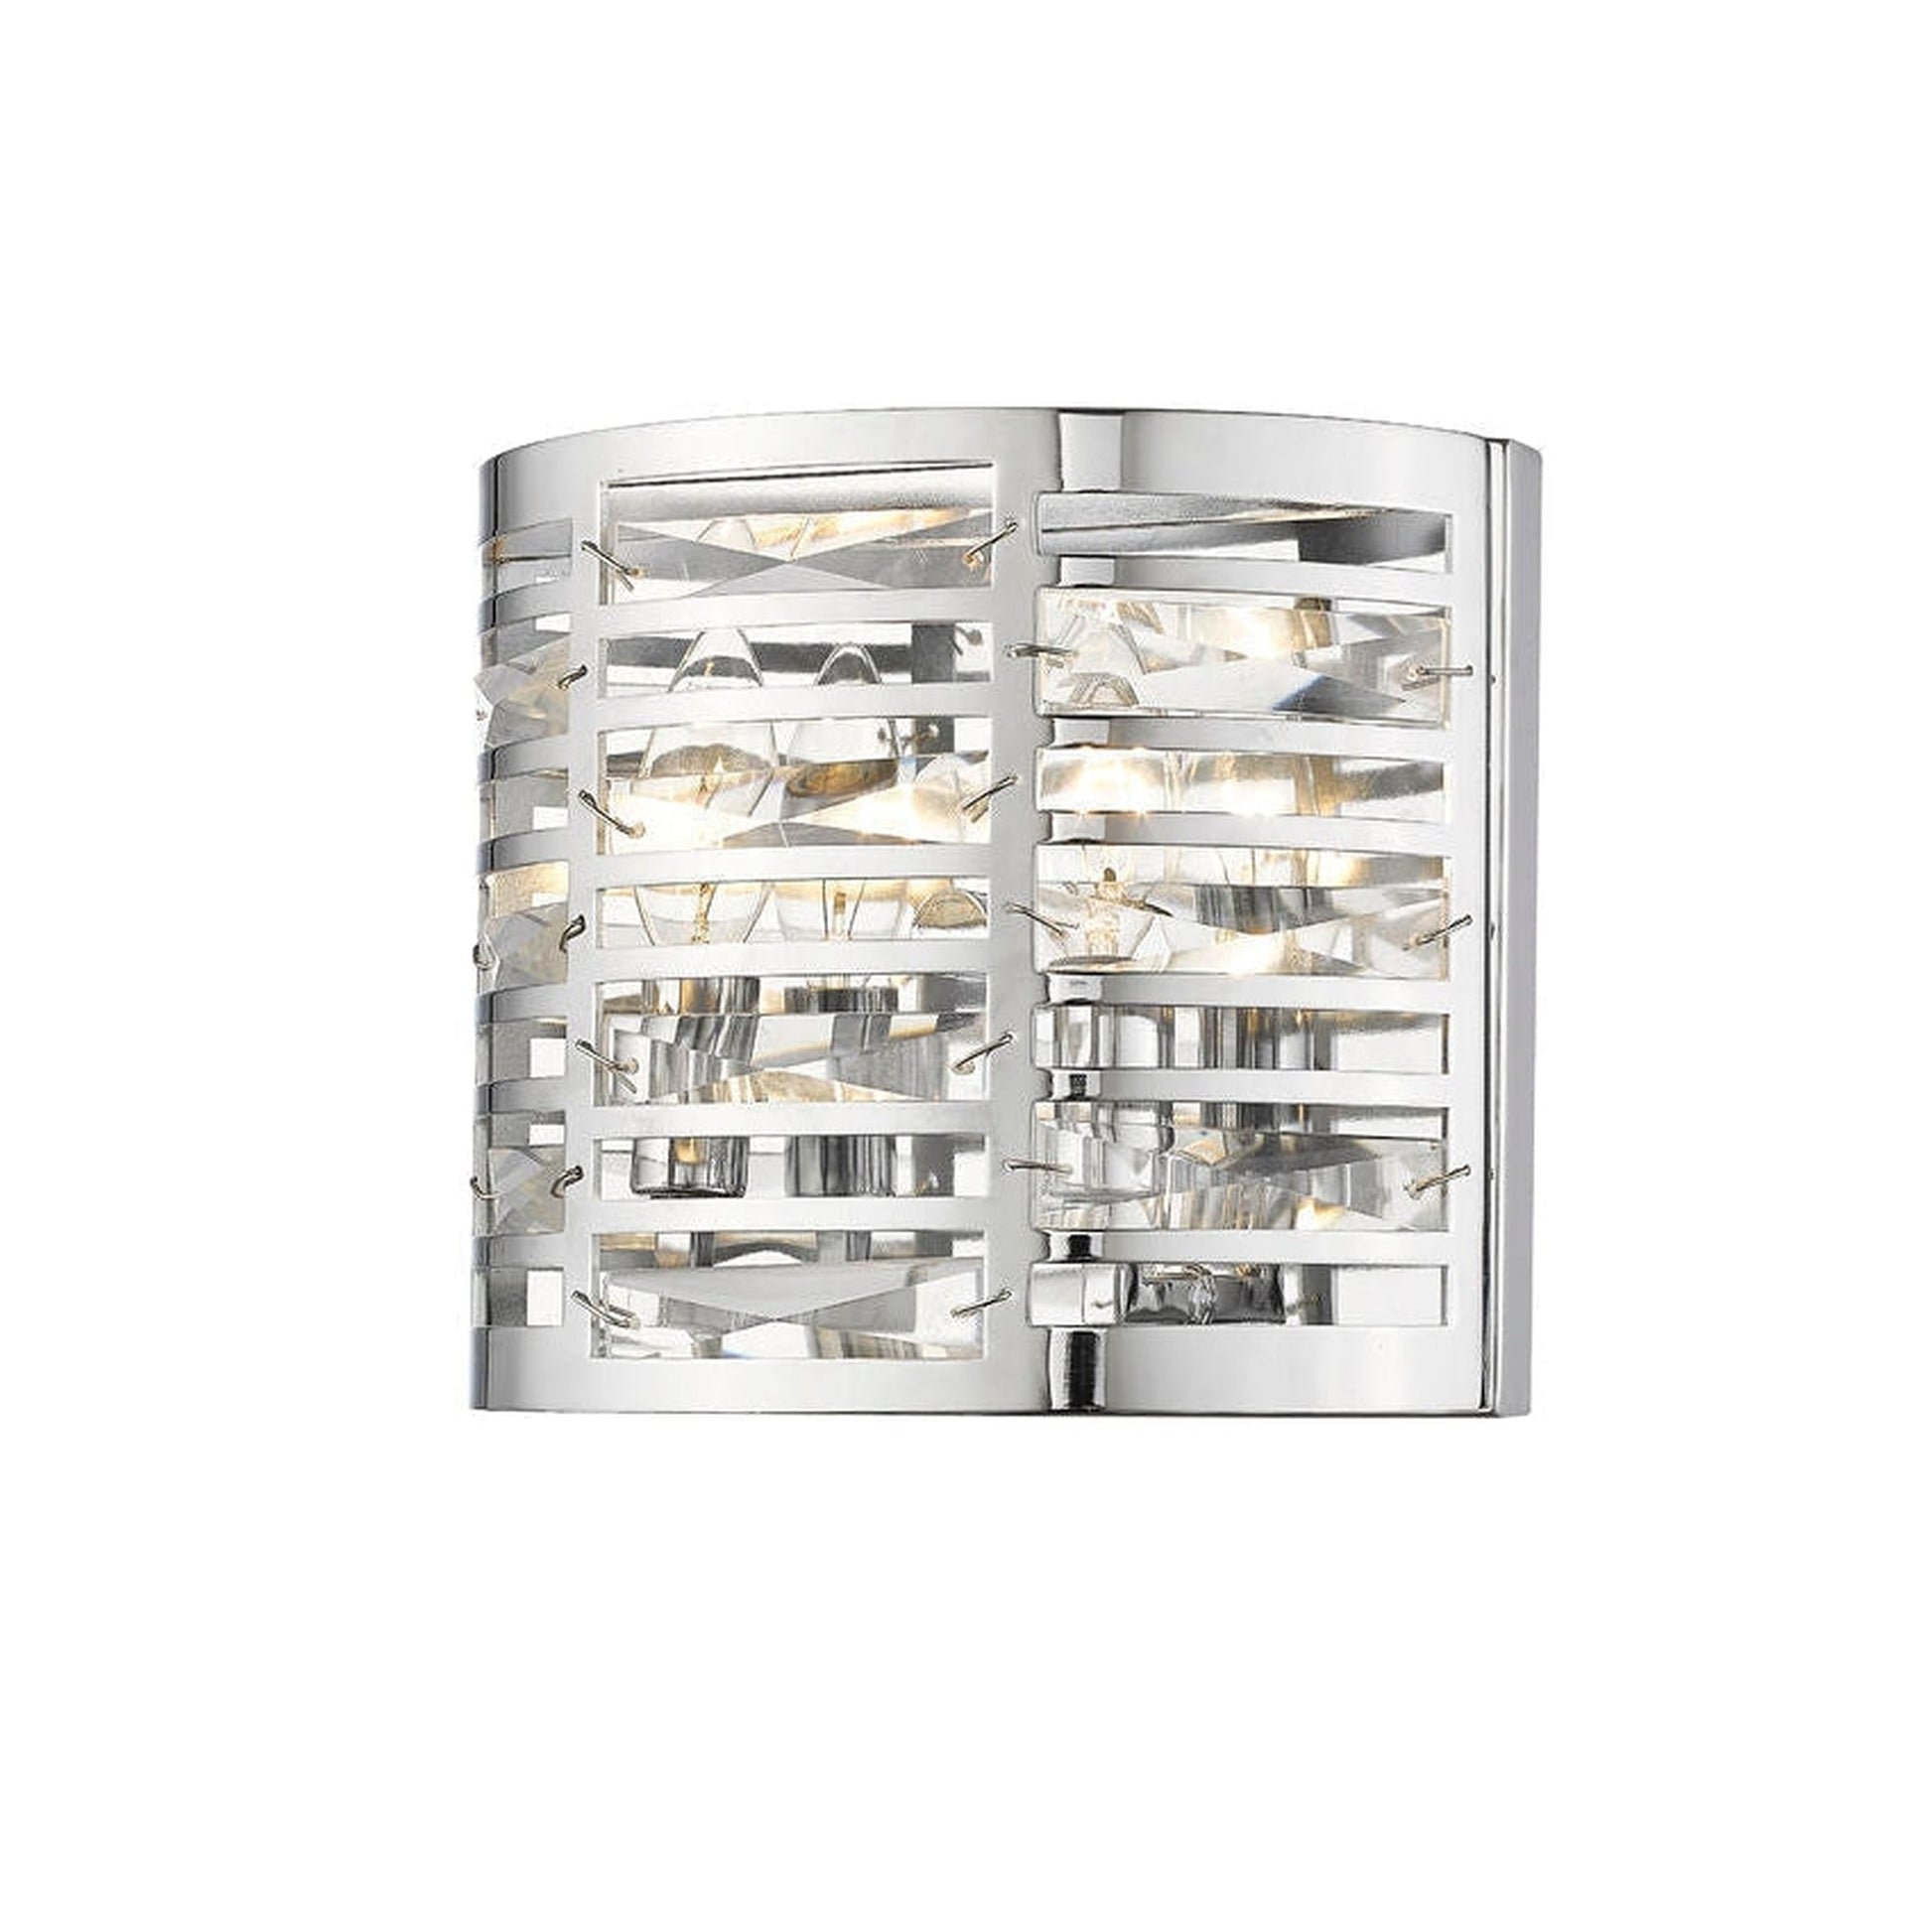 Z-Lite Cronise 10" 2-Light Steel Chrome Wall Sconce With Crystal Glass Shade